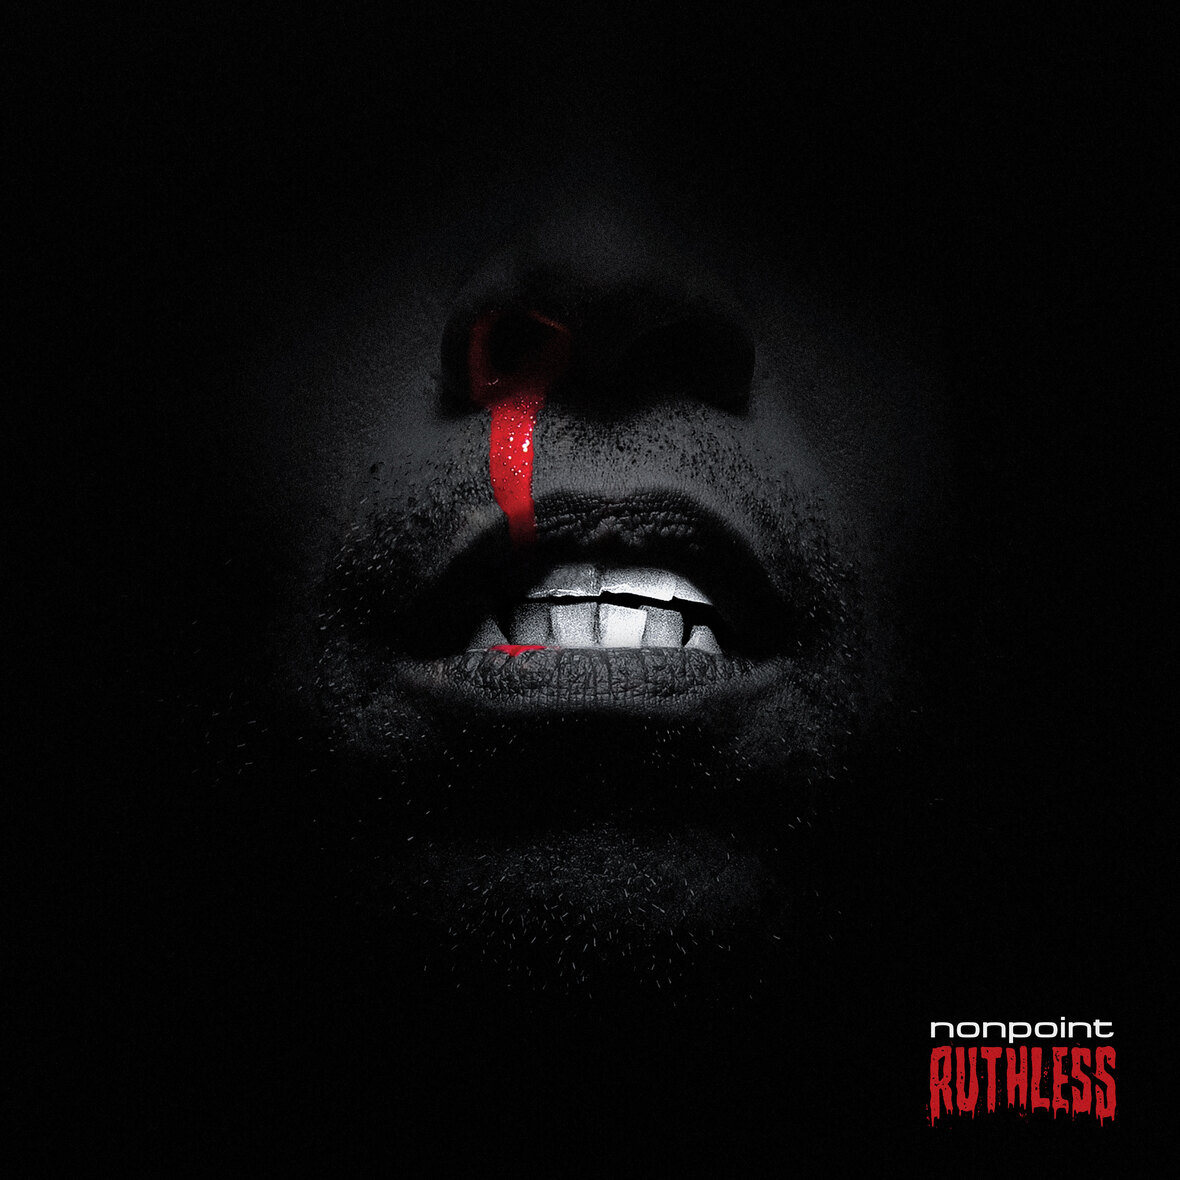 Nonpoint-Ruthless-AlbumCover-withtext